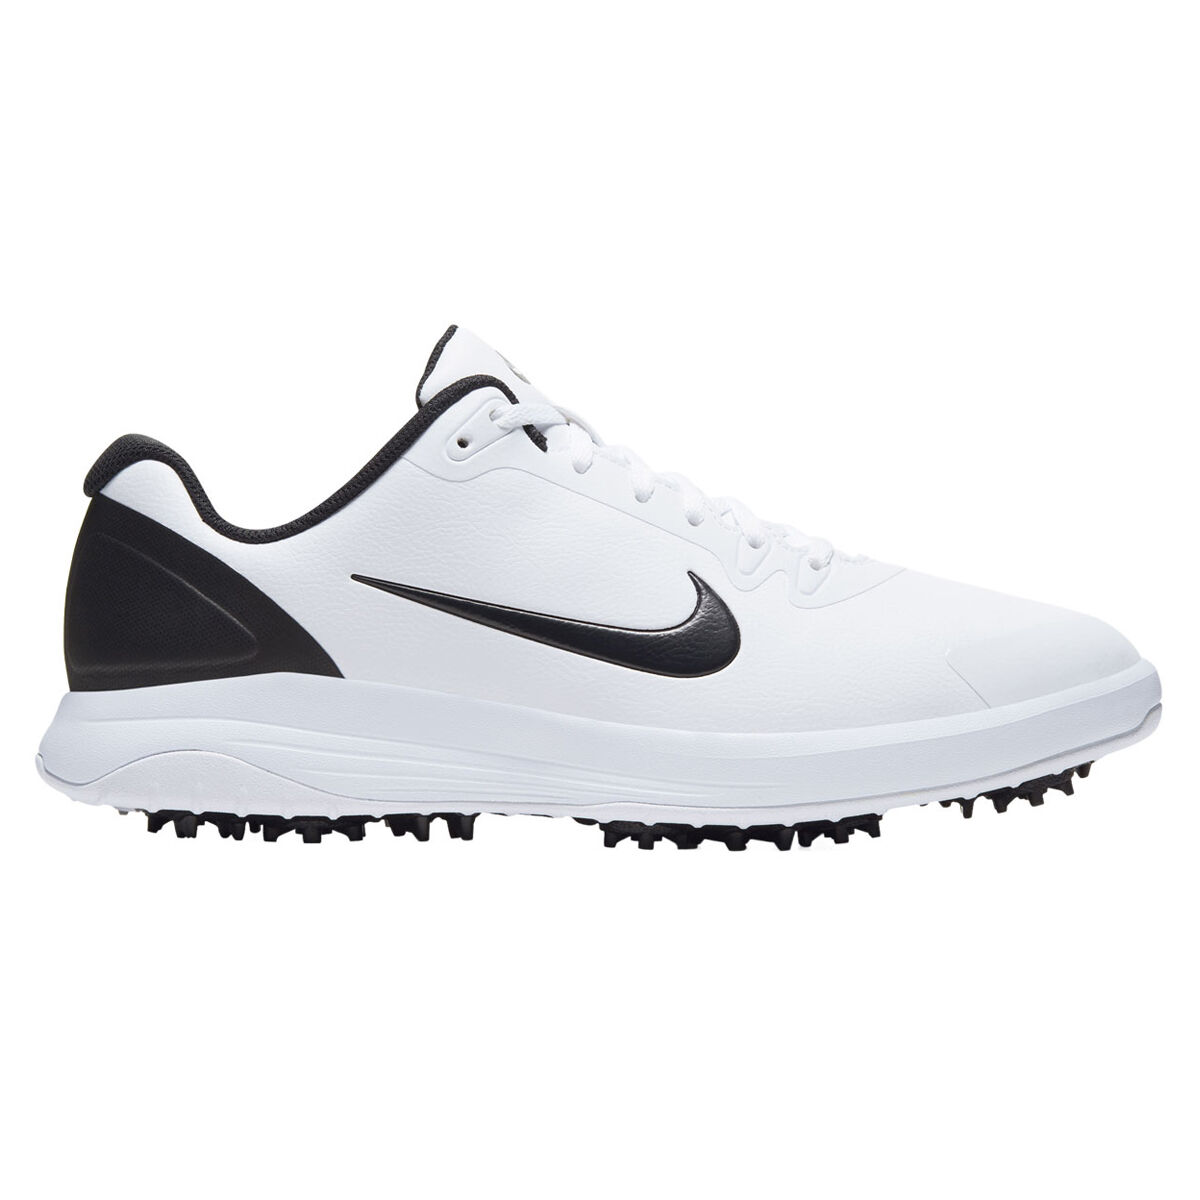 nike golf shoes afterpay